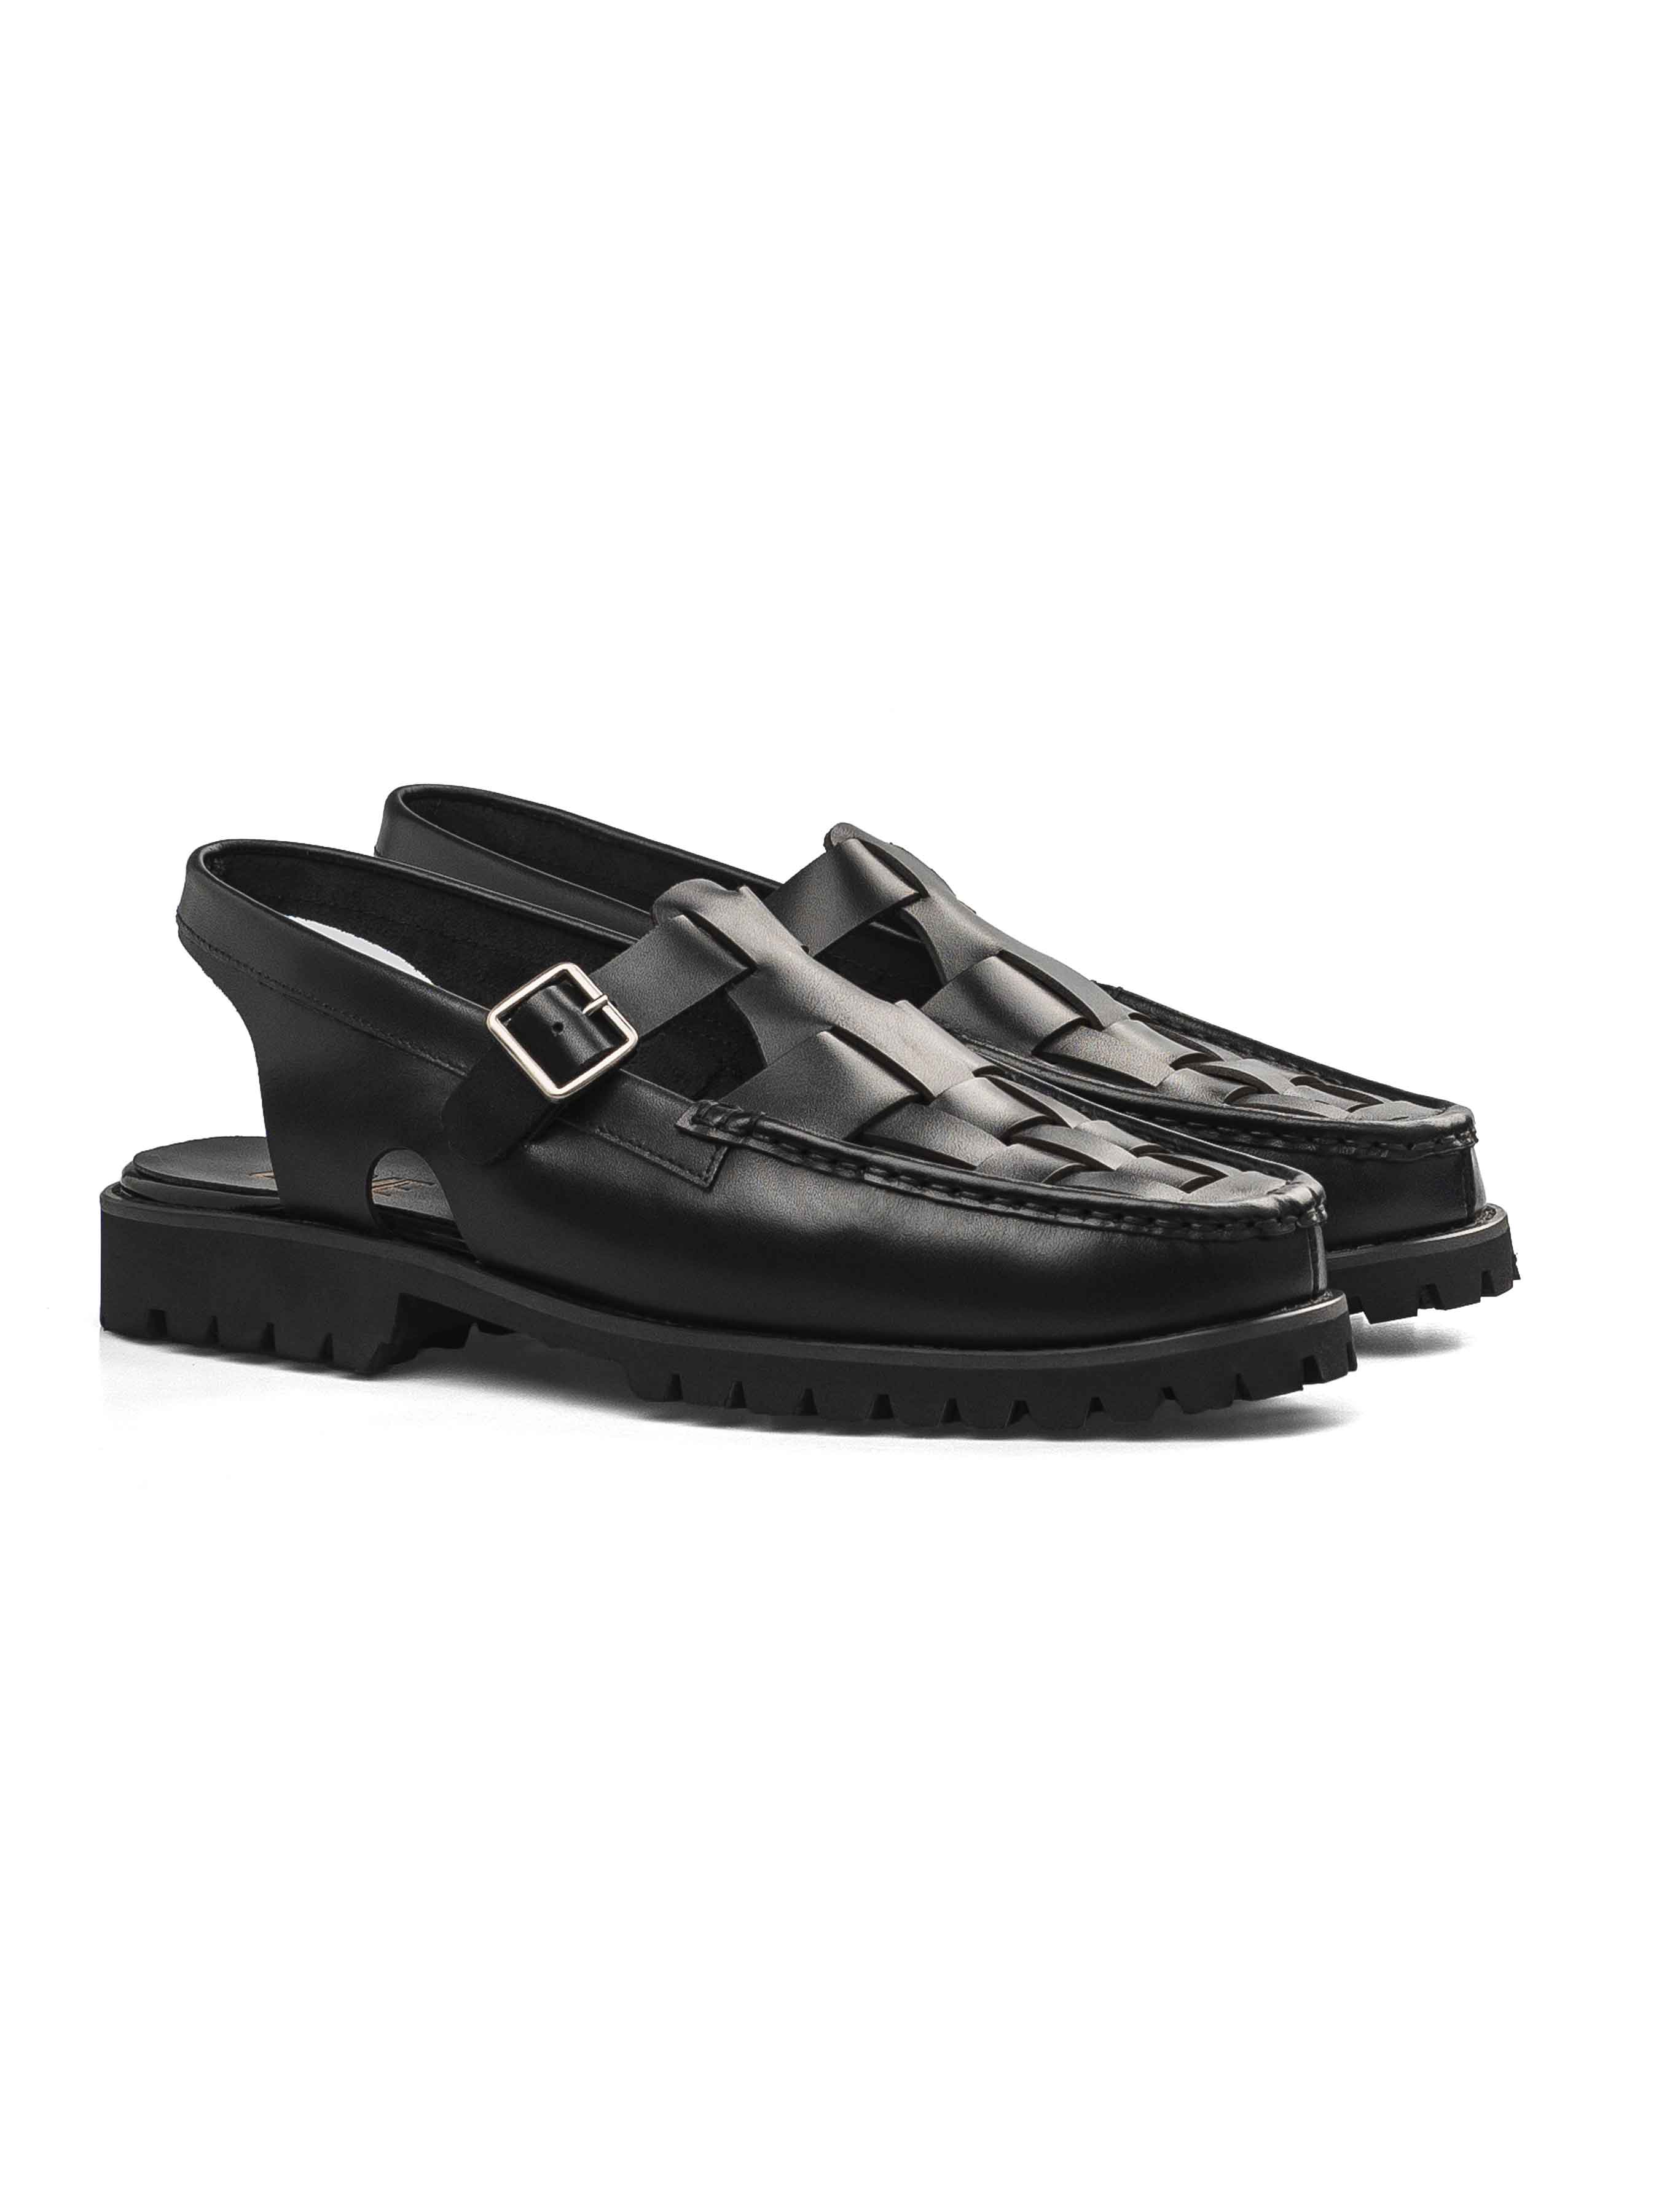 Perry Weave Sandal - Solid Black Leather (Chunky Sole)